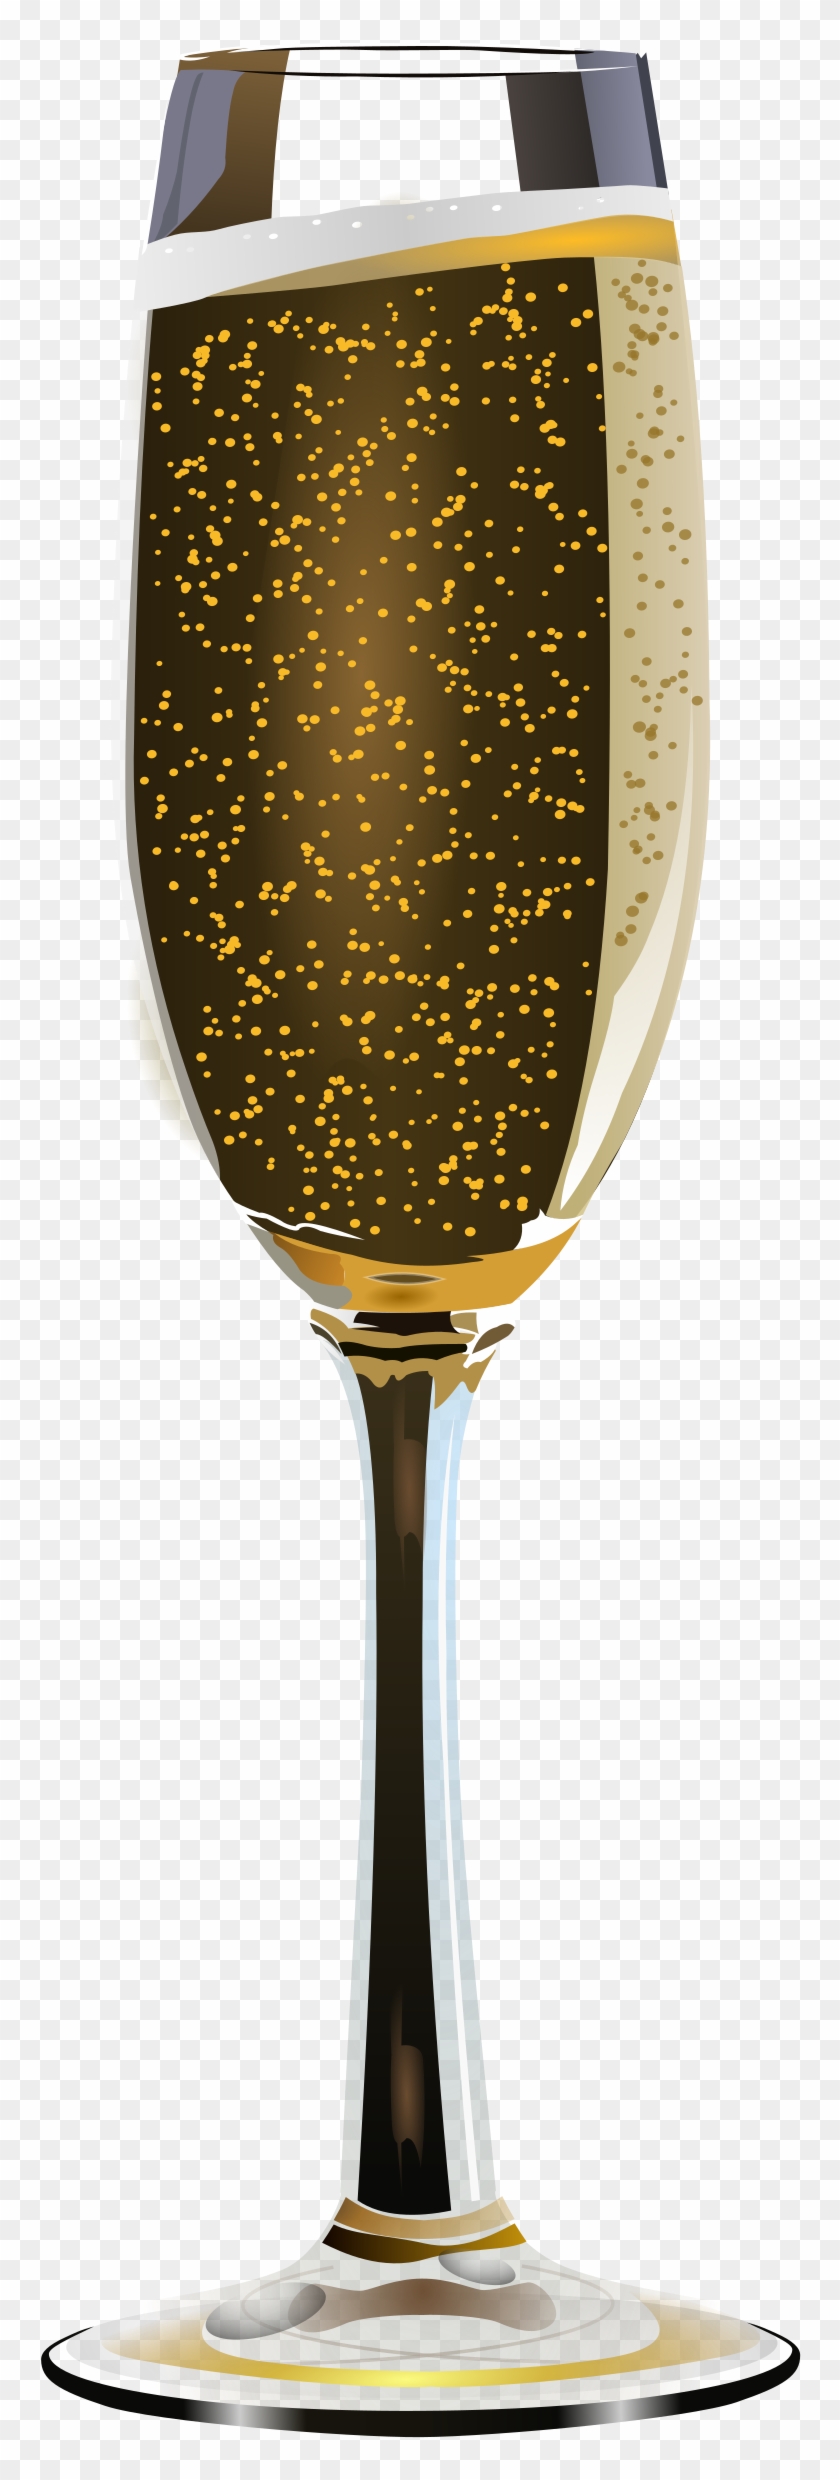 Beer Clipart Champagne Glass - Champagne Glasses Clip Art #532416